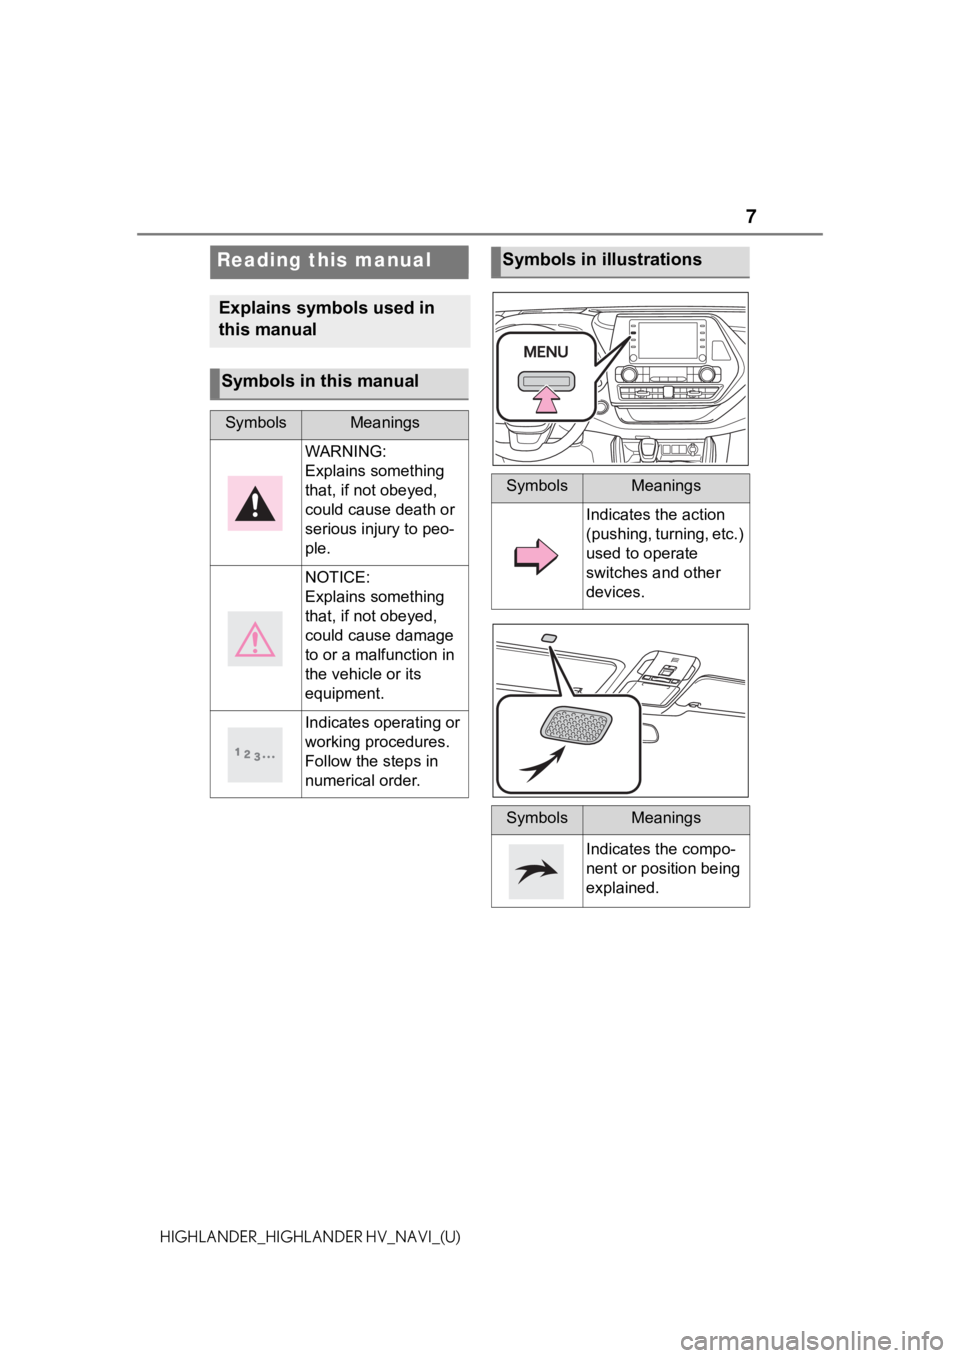 TOYOTA HIGHLANDER HYBRID 2021  Accessories, Audio & Navigation (in English) 7
HIGHLANDER_HIGHLANDER HV_NAVI_(U)
Reading this manual
Explains symbols used in 
this manual
Symbols in this manual
SymbolsMeanings
WARNING:
Explains something 
that, if not obeyed, 
could cause deat